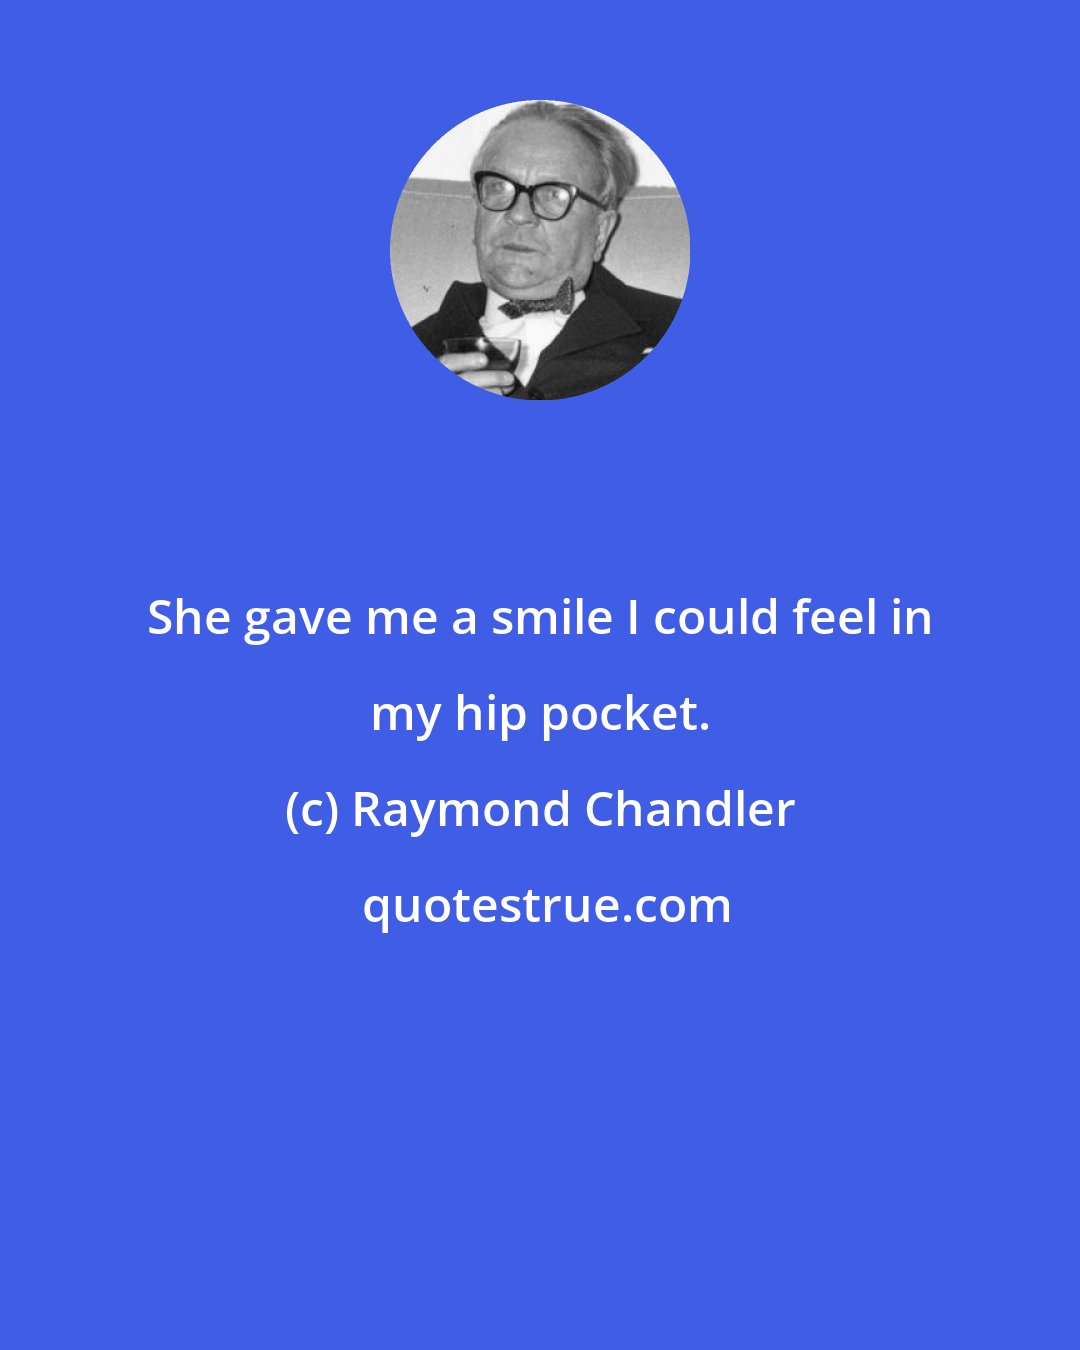 Raymond Chandler: She gave me a smile I could feel in my hip pocket.